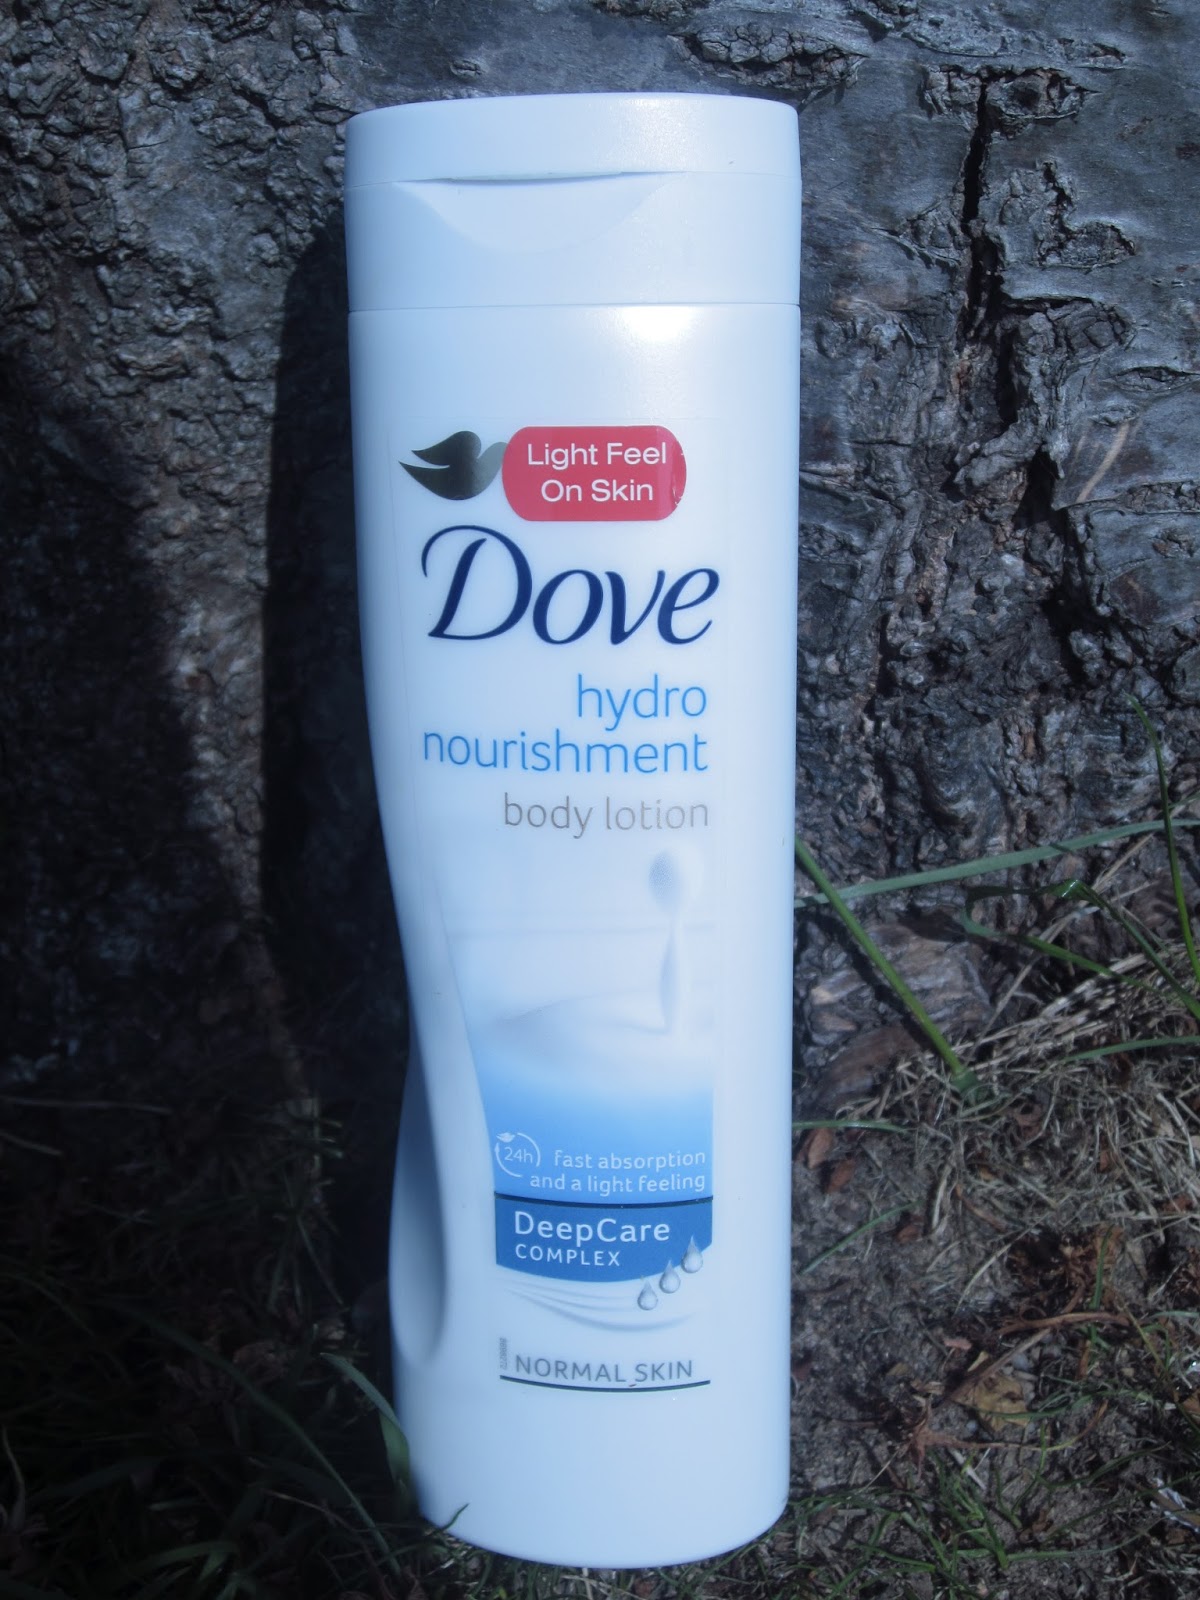 Forevermissvanity - A UK Lifestyle Blogger : Feeling Natural with Dove